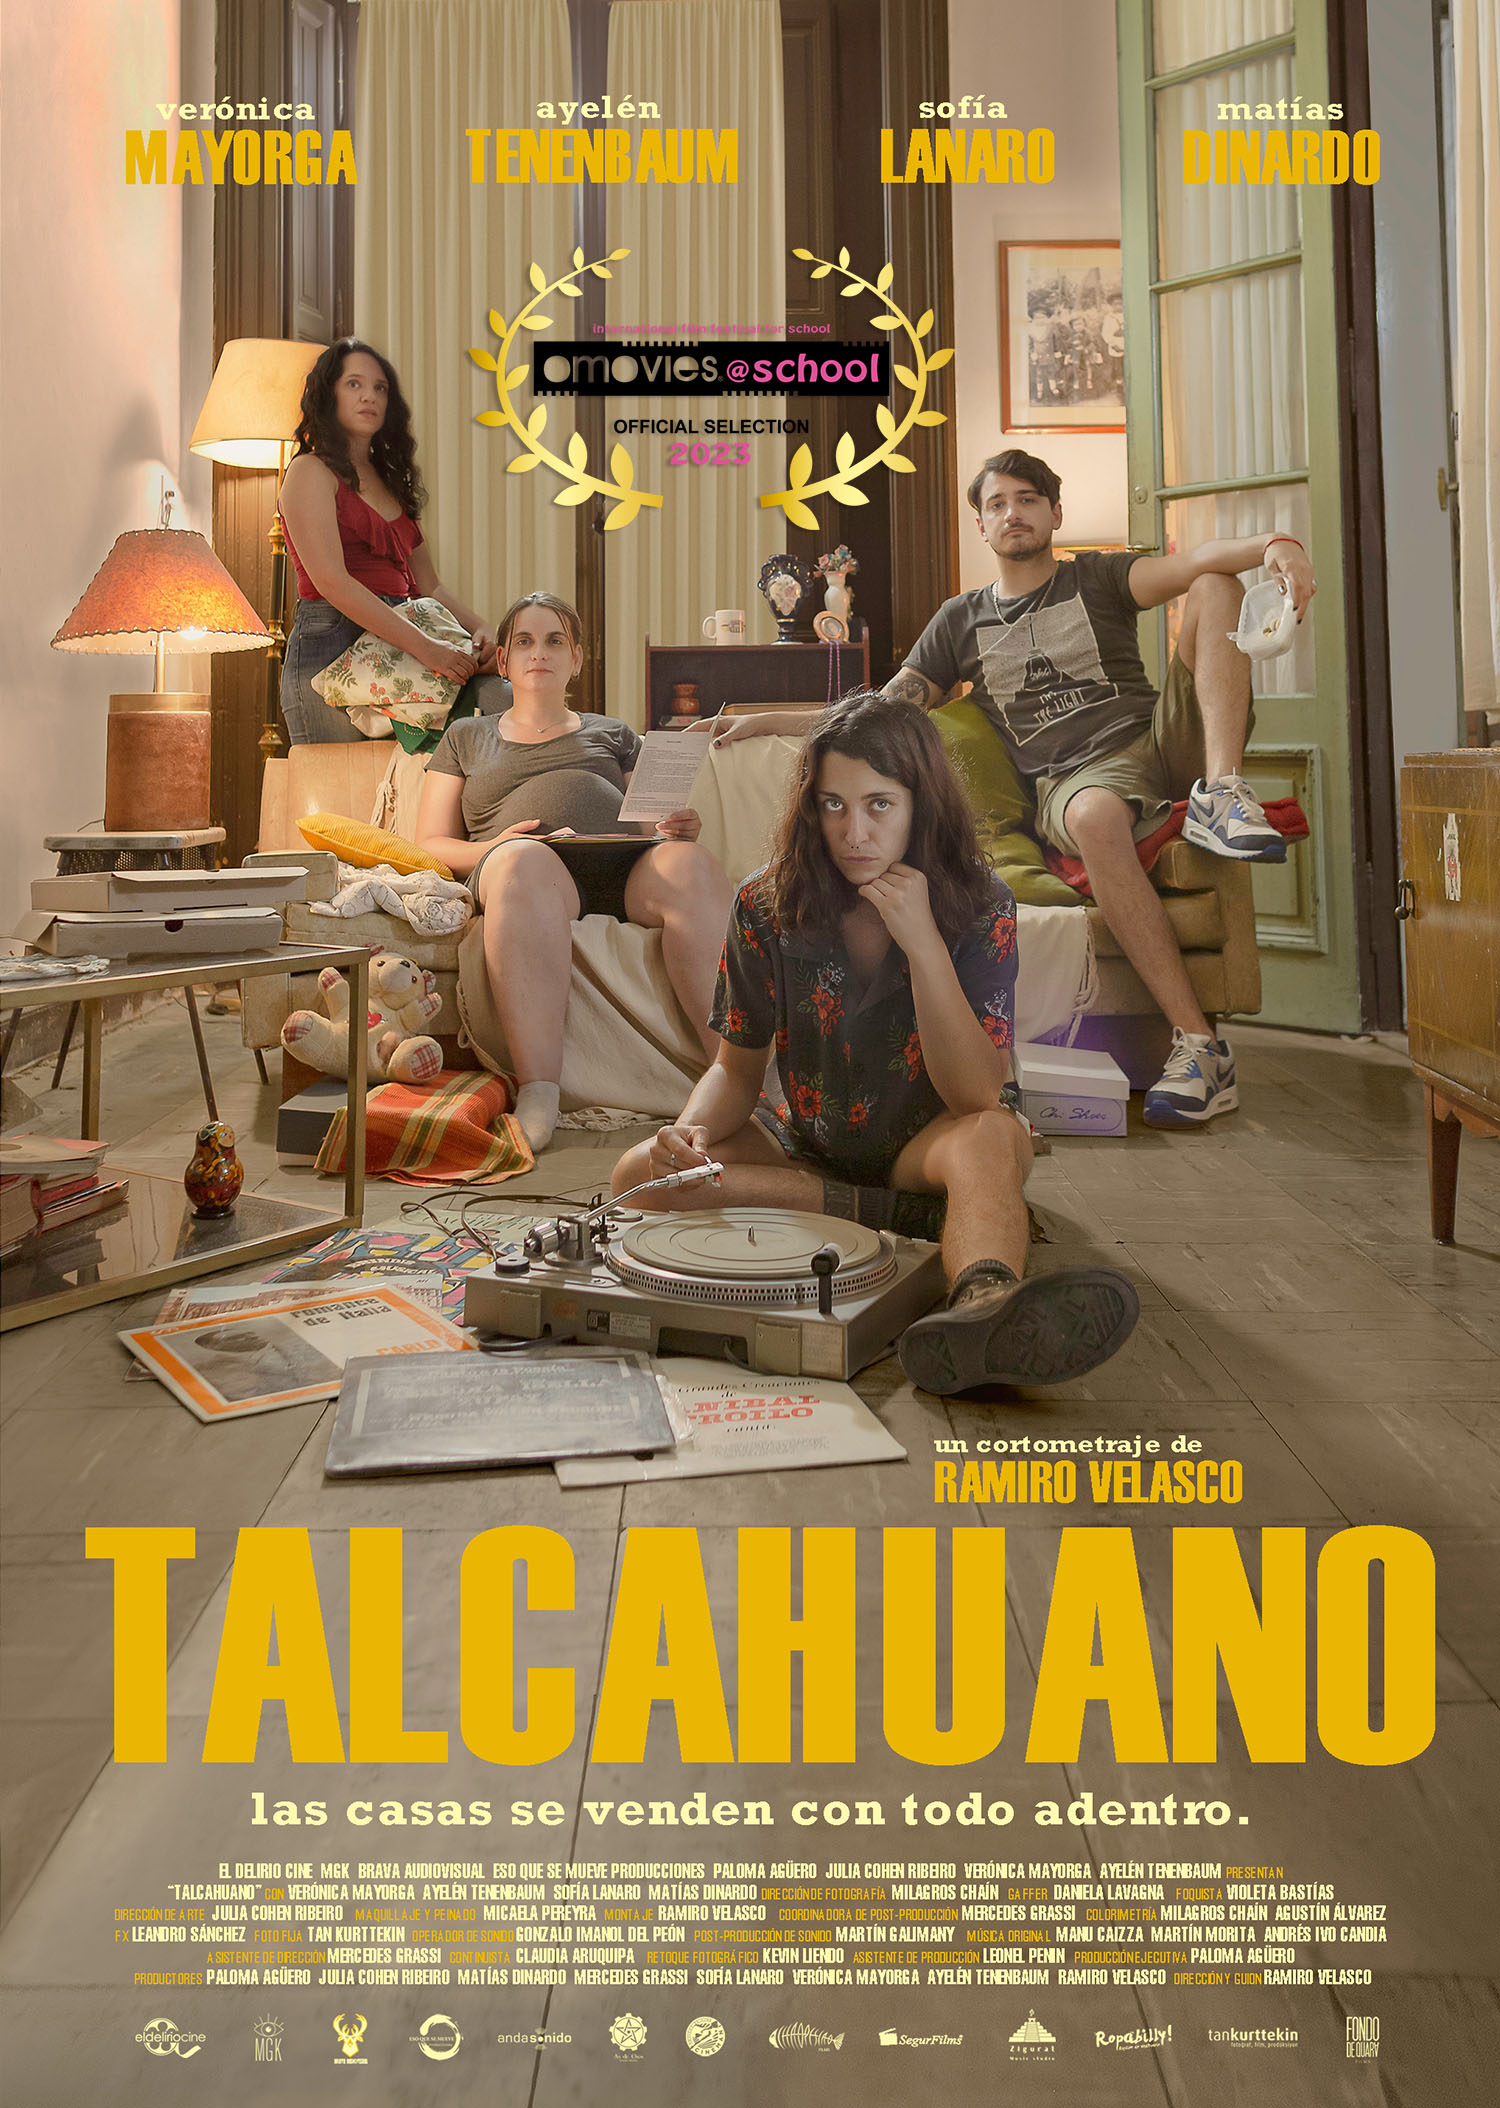 OFFICIAL SELECTION: TALCAHUANO